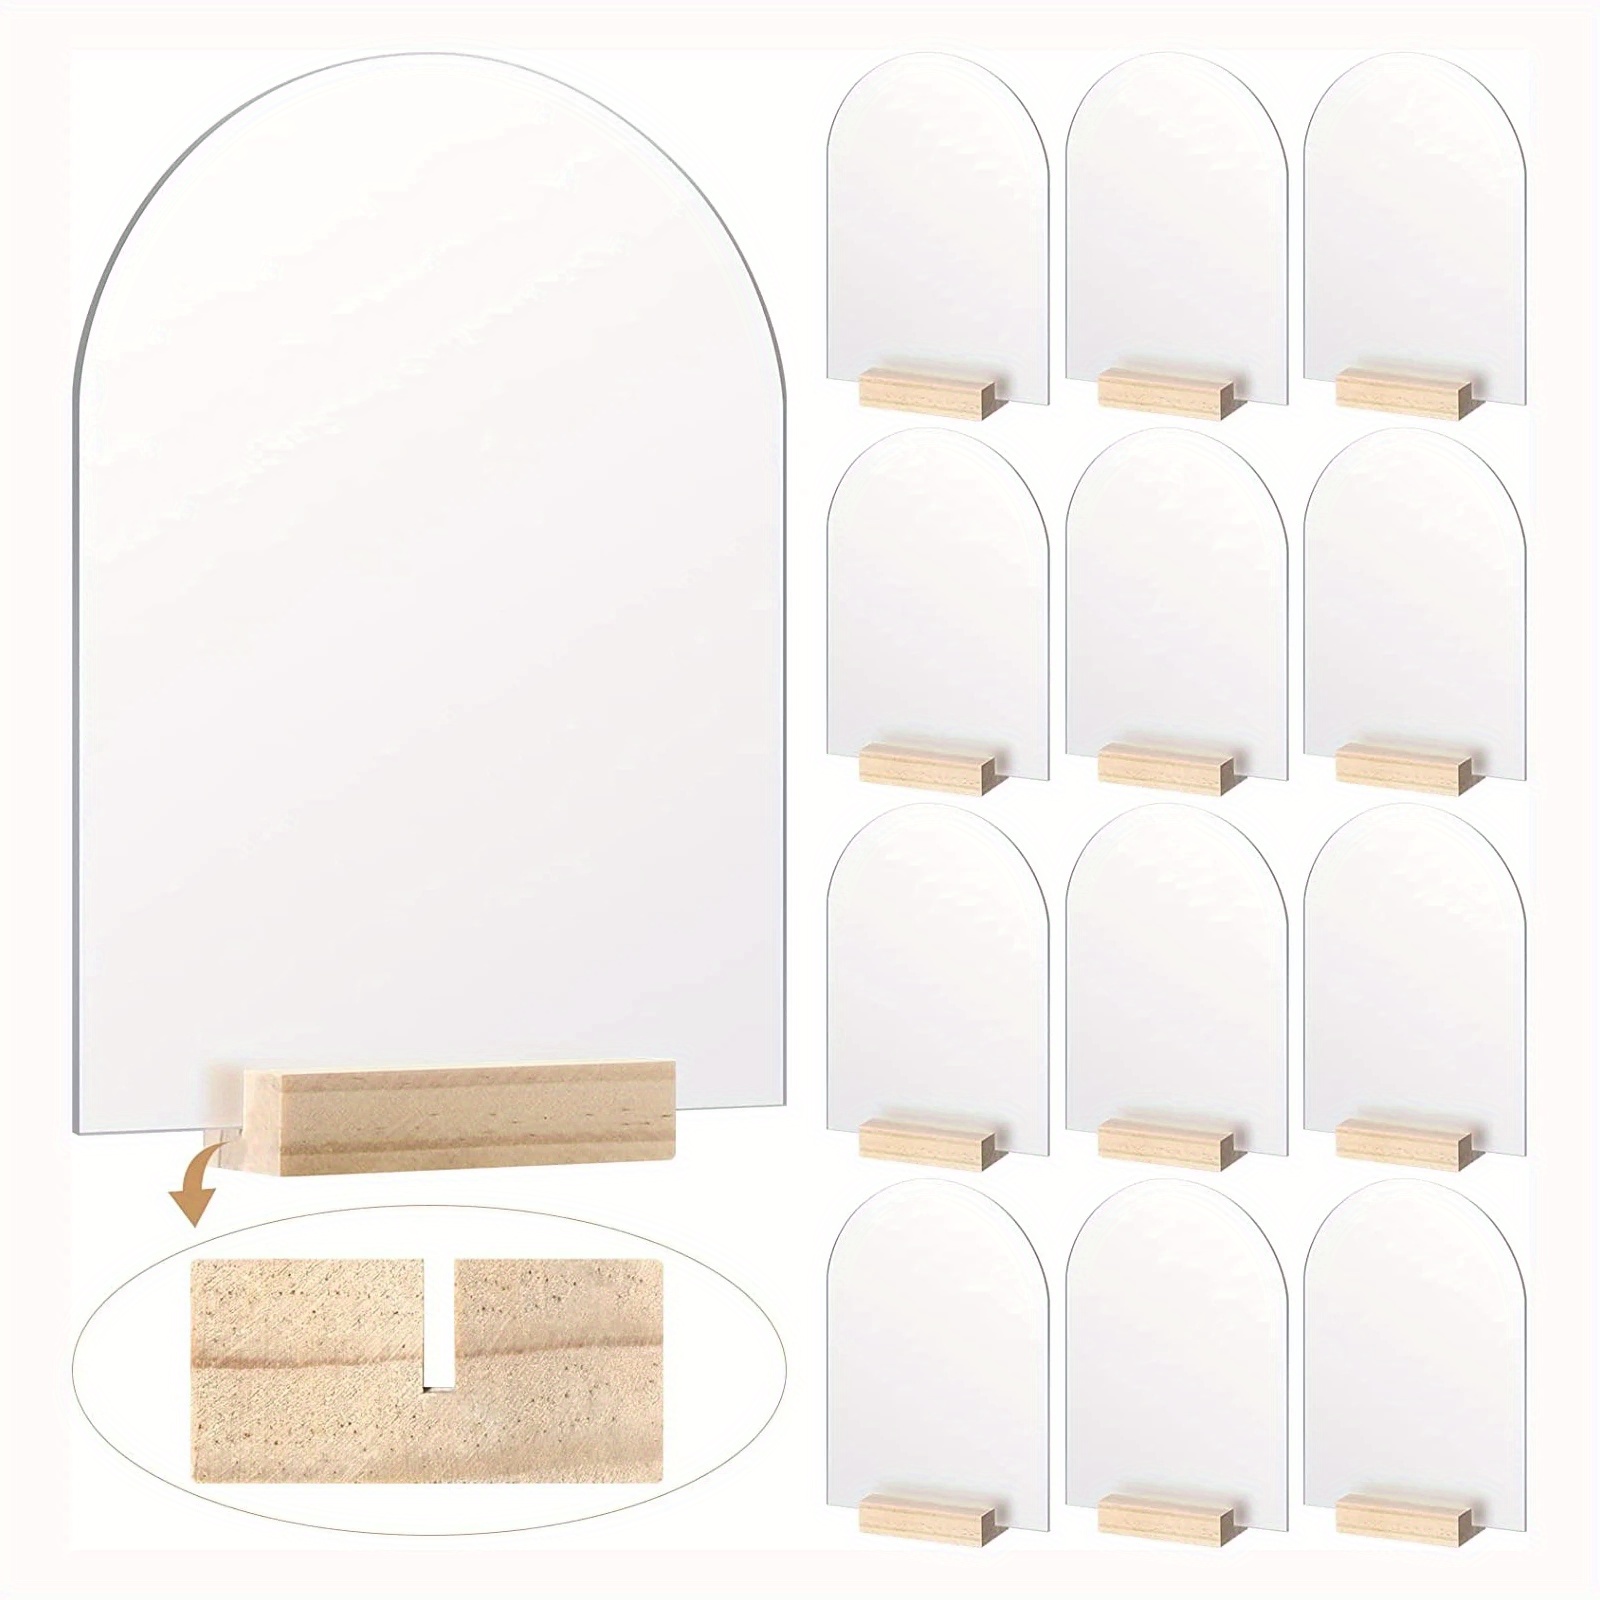 

5pcs, Blank Acrylic Sheet With Wood Stand Holder Arched Sign Table Number Card Base For Wedding Party Centerpieces Decor